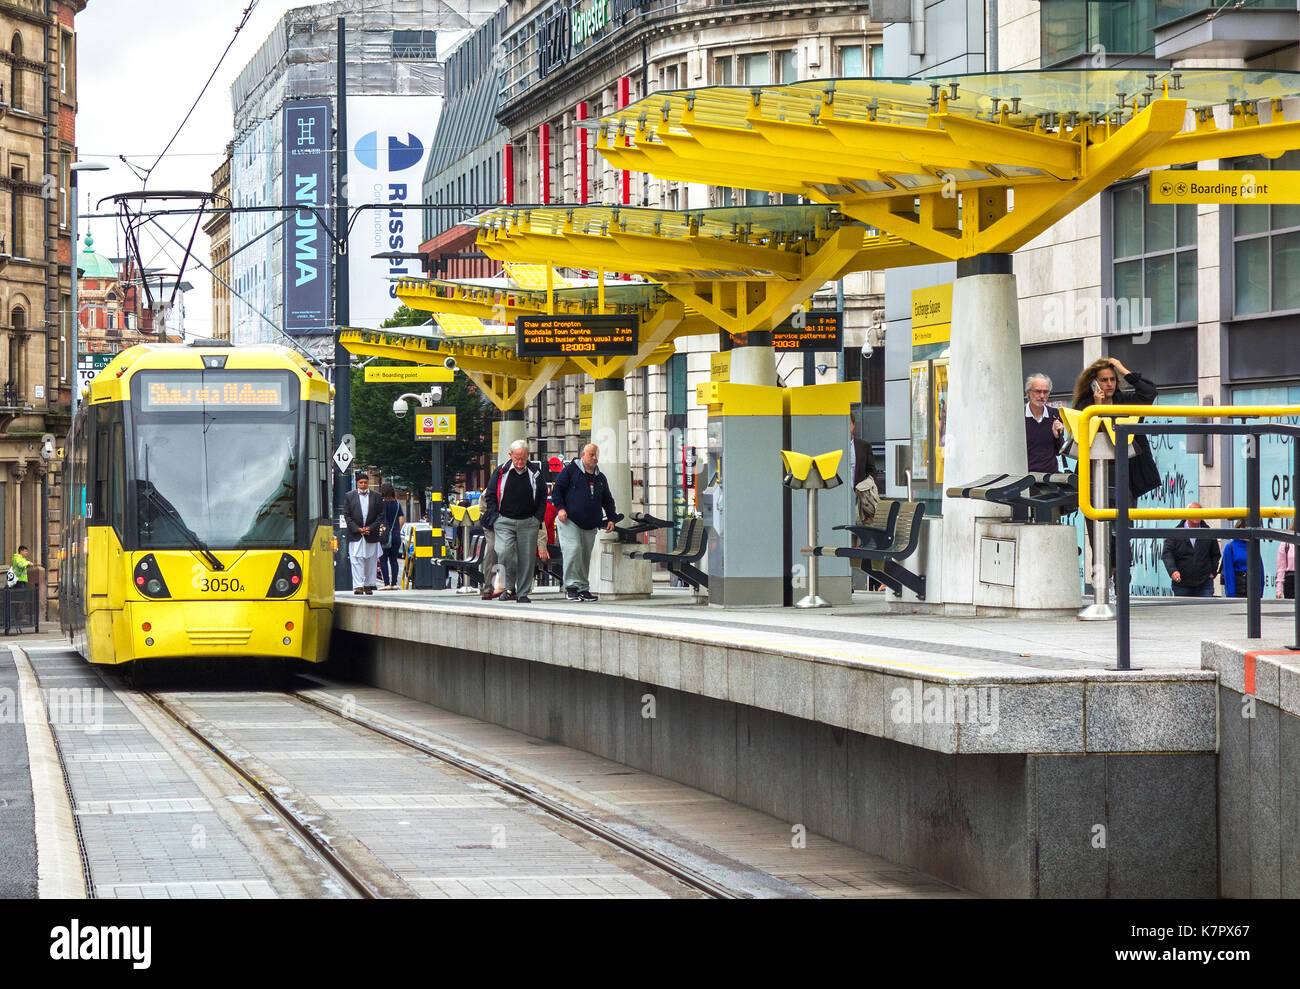 the tram/light rail system metrolink runs in the greater manchester area of england, britain, uk. Stock Photo